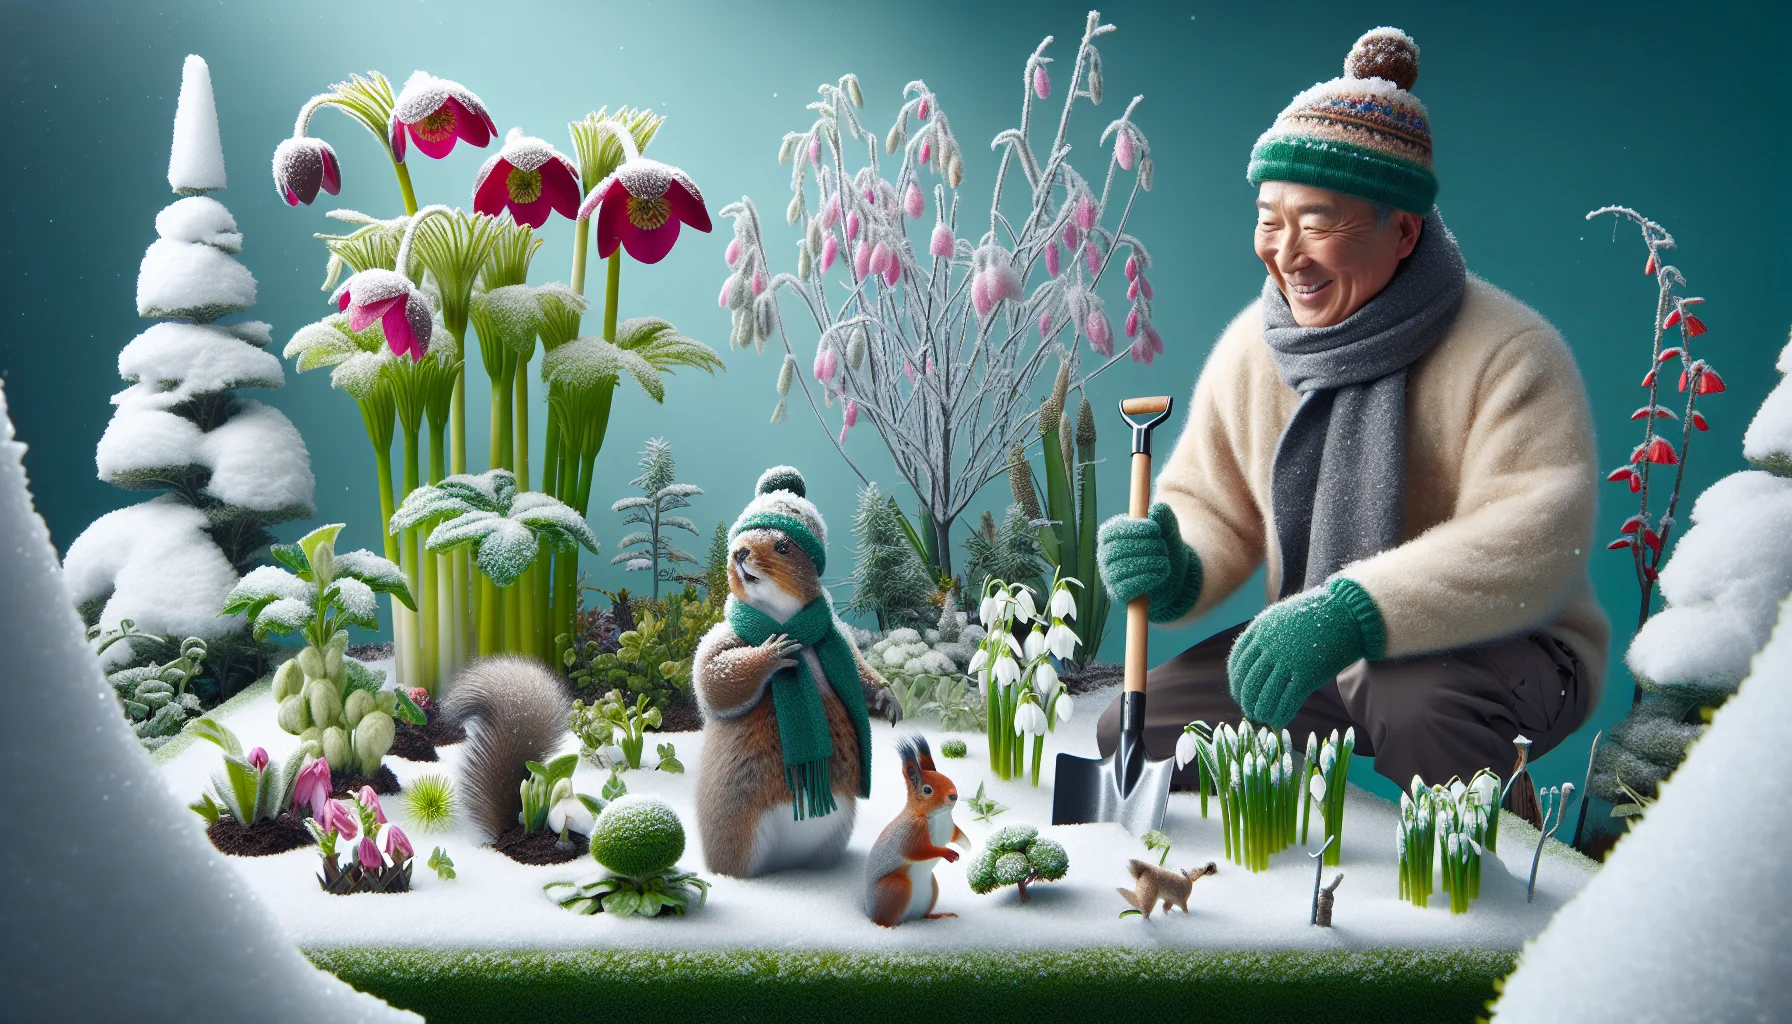 Design a hyperrealistic scene that depicts an amusing gardening event occurring amidst the icy elegance of a winter garden. Visualize a variety of winter-appropriate plants, such as hellebores, snowdrops, and winter jasmine, revealing their vibrant hues from within snowy blankets. Establish a hilarious moment where a lively East Asian male, wearing a cozy gardener attire, humorously interacts with a quick-footed squirrel over a frozen spade. Inject a sense of fun and adventure by adding humorous elements, such as plants equipped with miniature hats and scarves, turf flaunting oversized earmuffs, or a snow figure masquerading as a gardener.